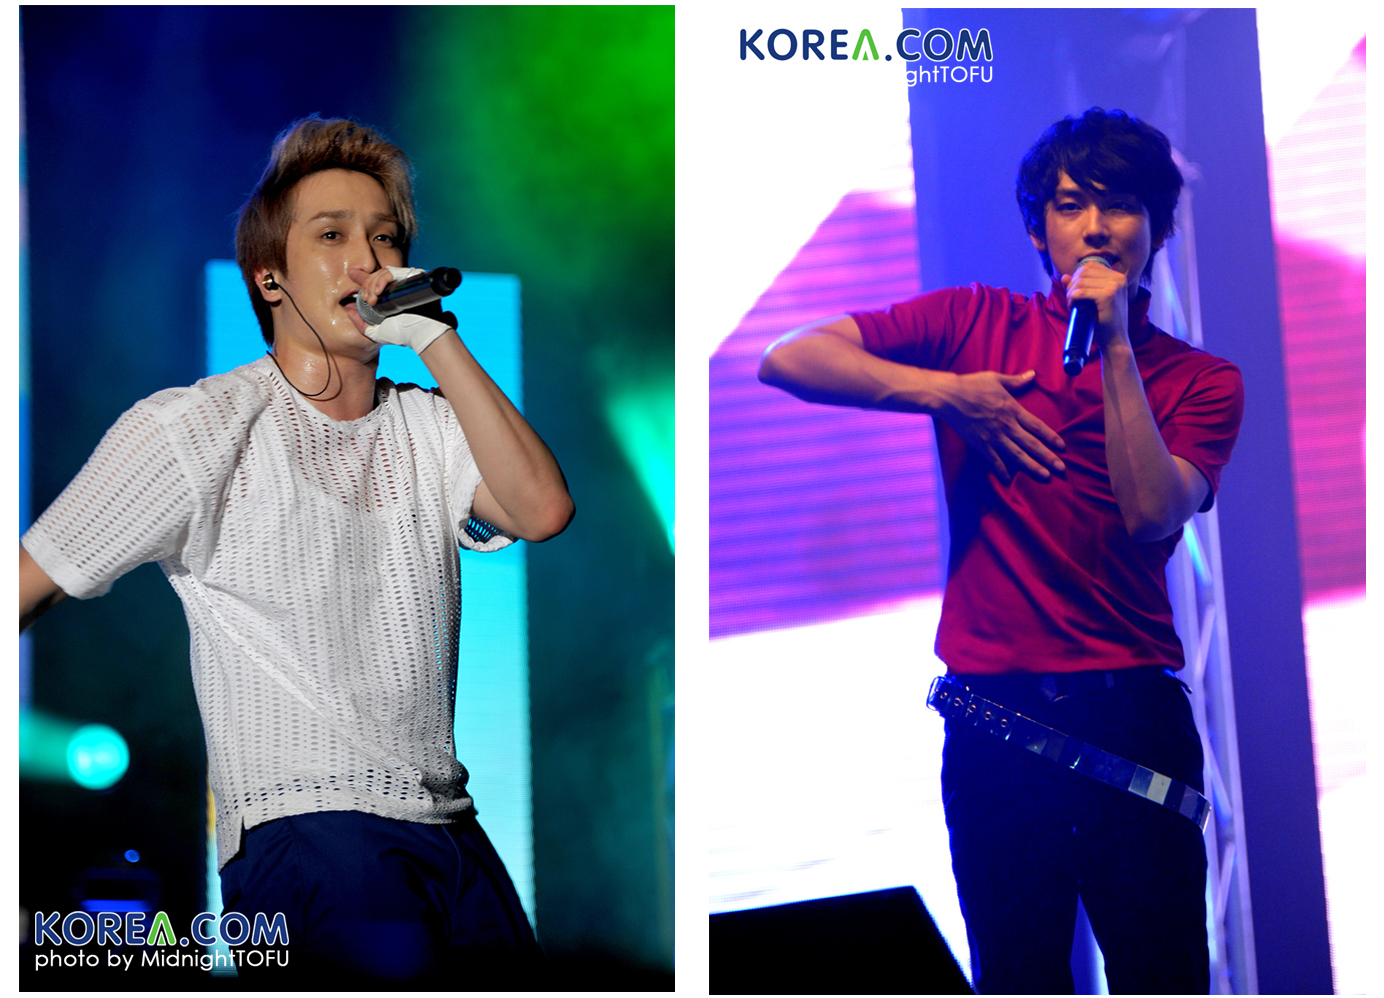 [OTHER]  121110 ZEA Showcase Live in Malaysia 54a03